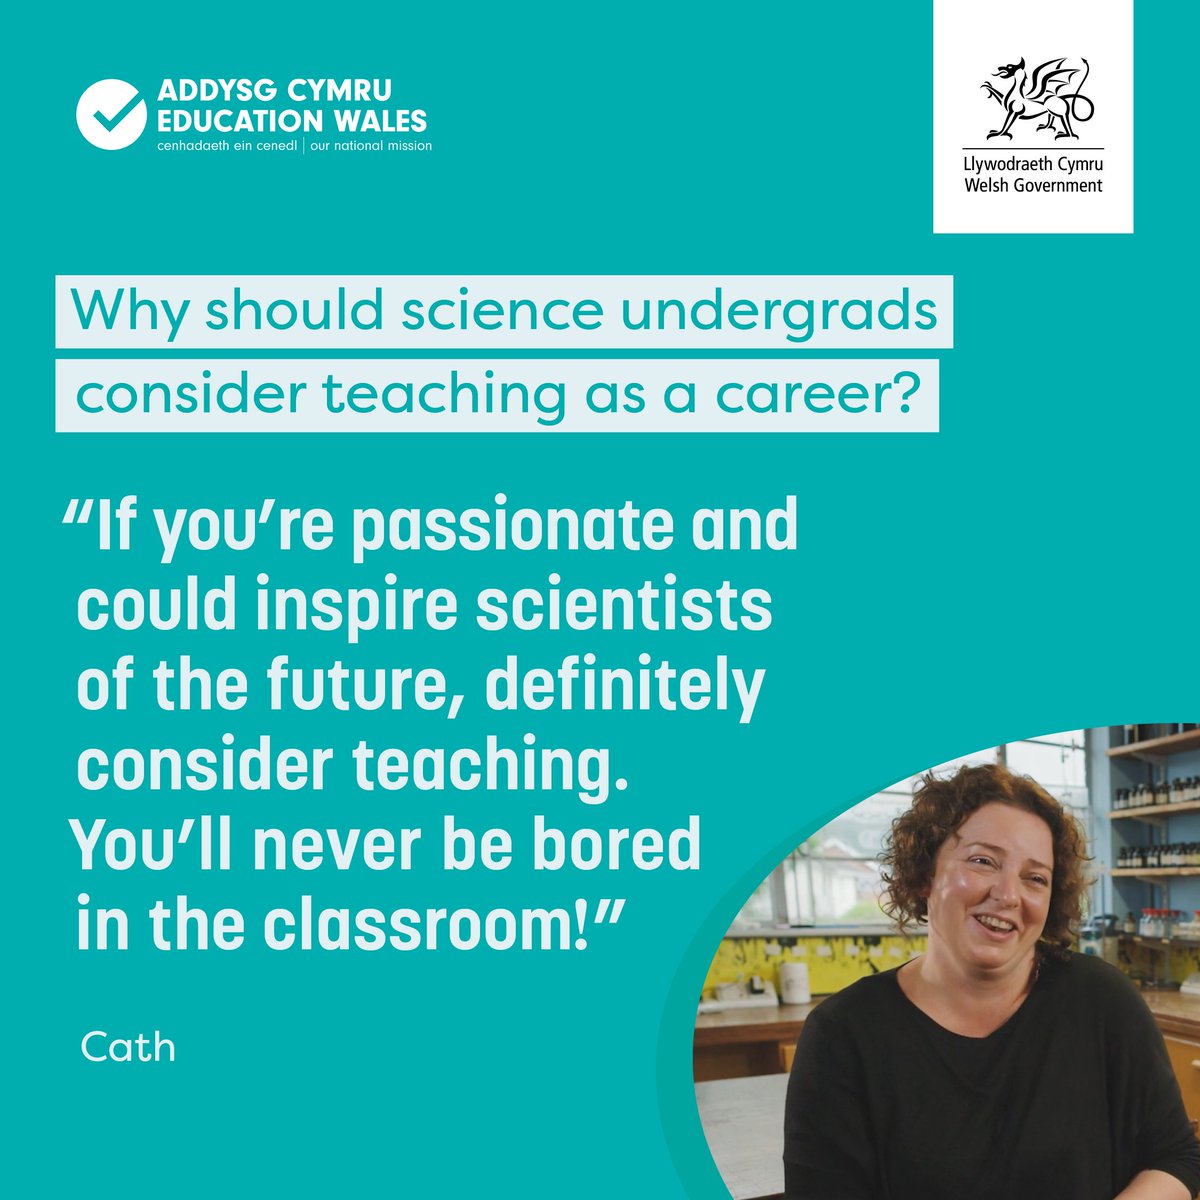 It’s #BritishScienceWeek! There are so many amazing things you can do in the world of science. Why not inspire the next generation of scientists in your own unique way? Teach STEM: educators.wales/stem #TeachingWales @PGCEswanseauni @OUCymru